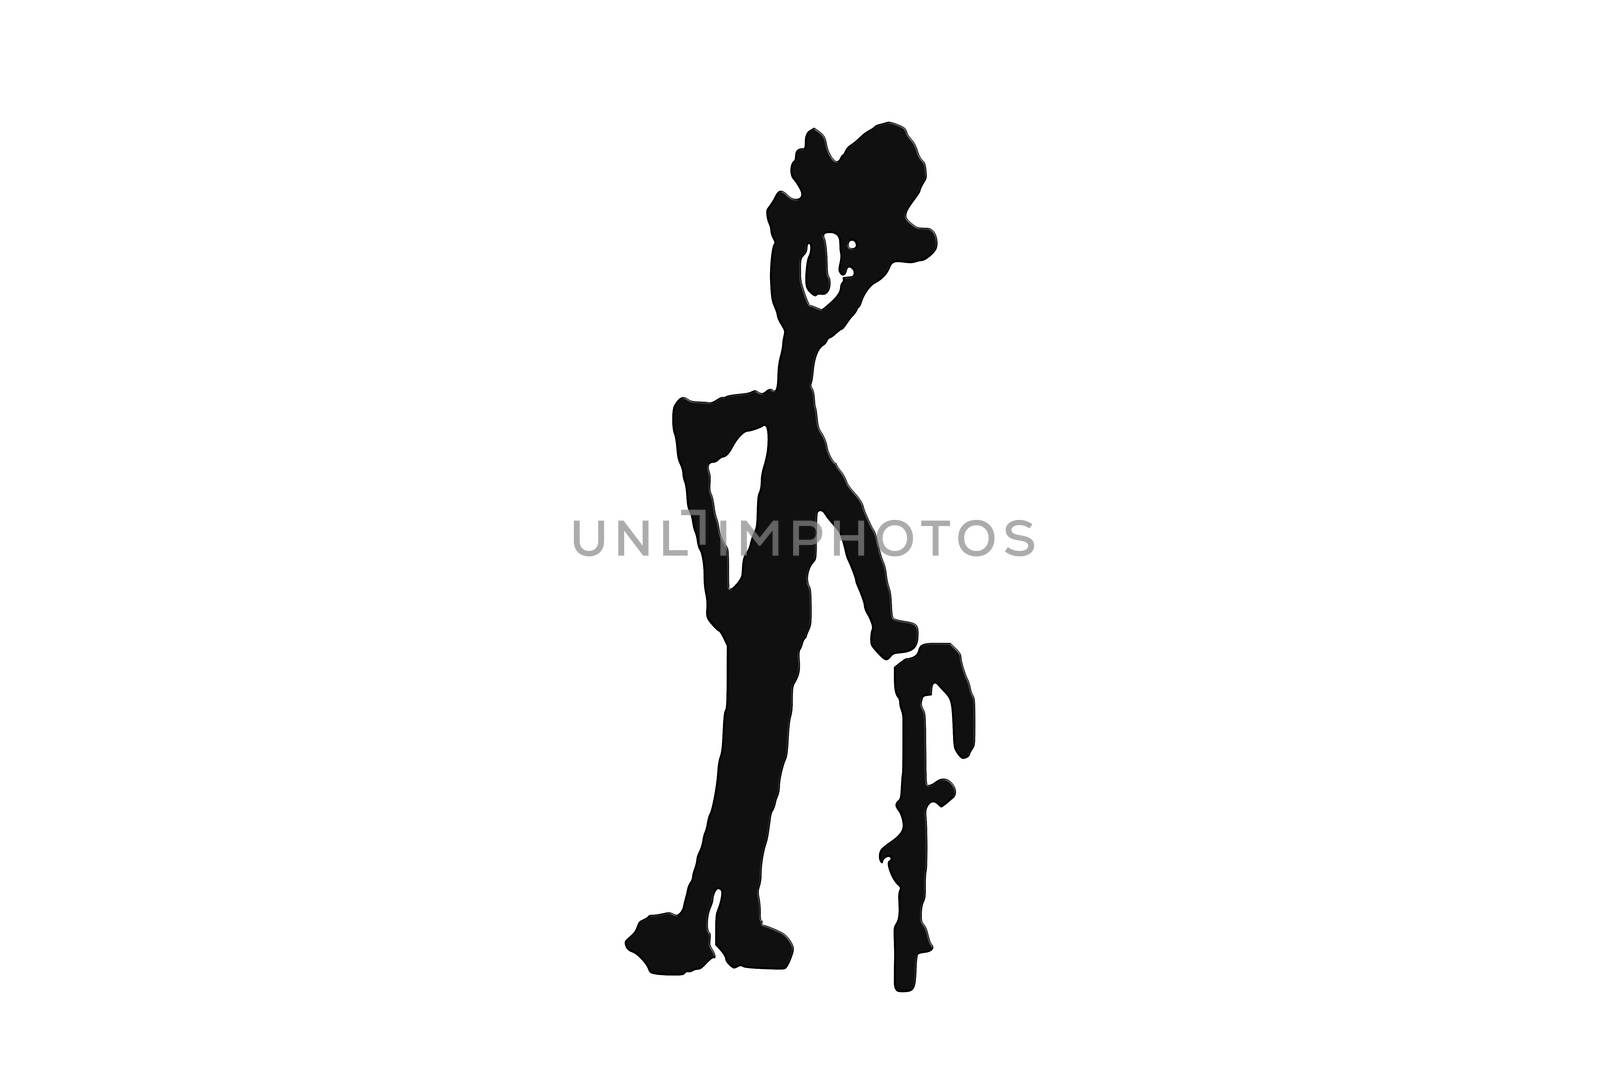 Drawn figure reduced to the essentials against white background with copy space.